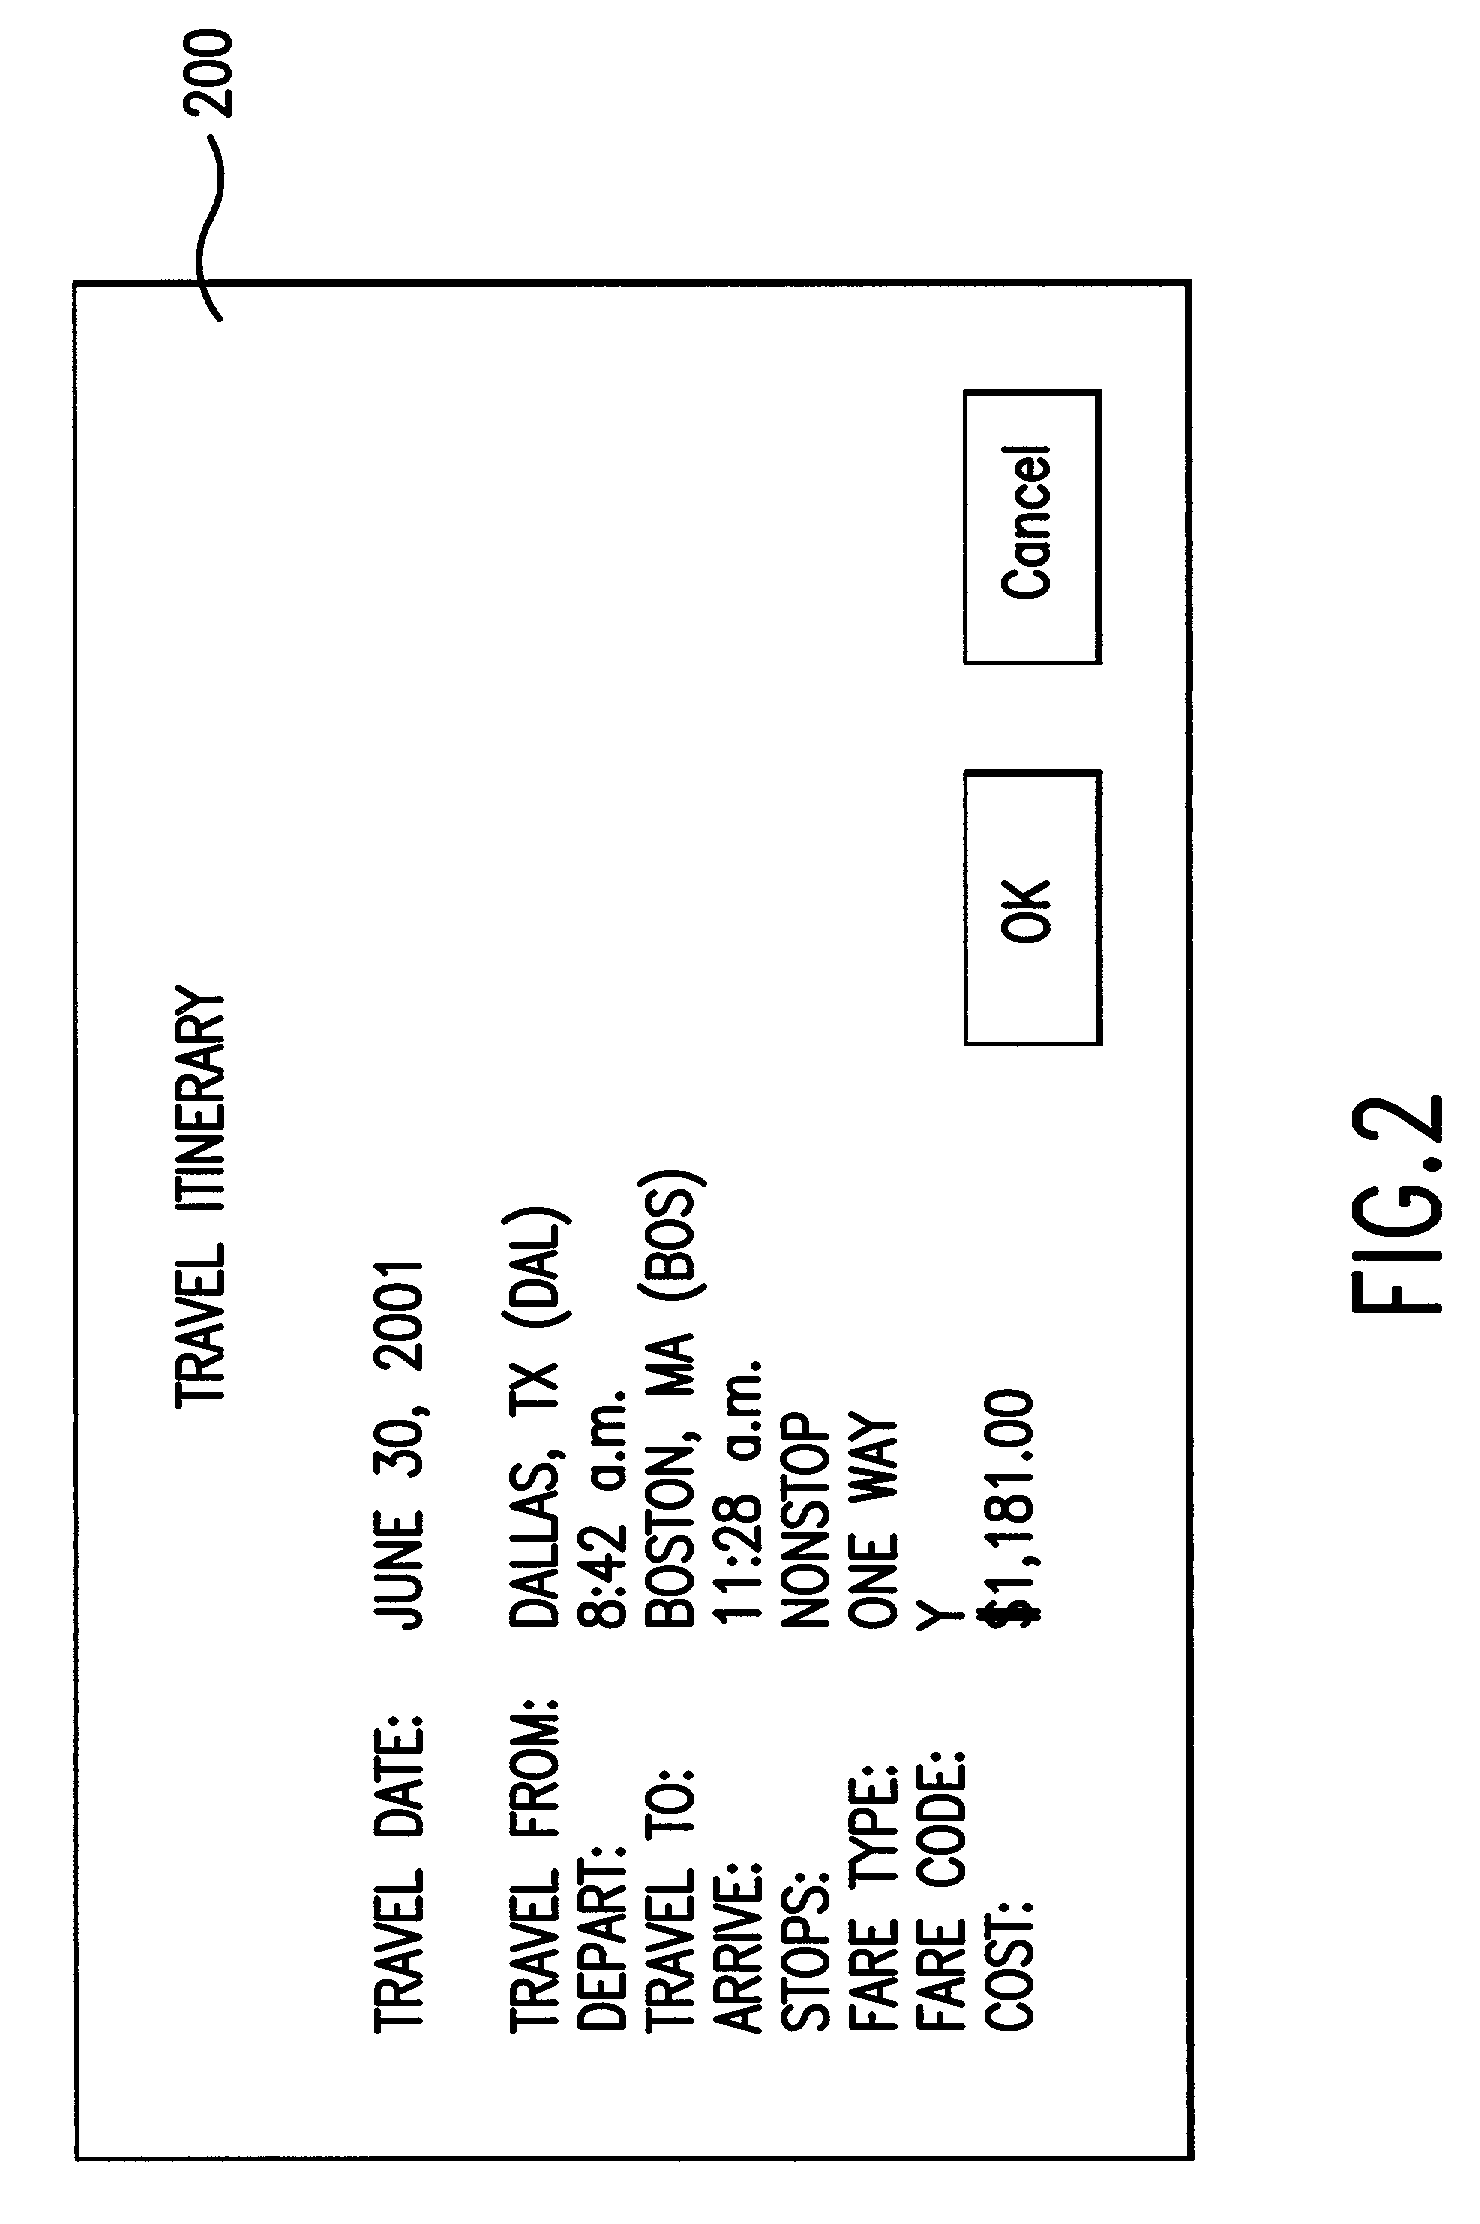 Voice-controlled data/information display for internet telephony and integrated voice and data communications using telephones and computing devices